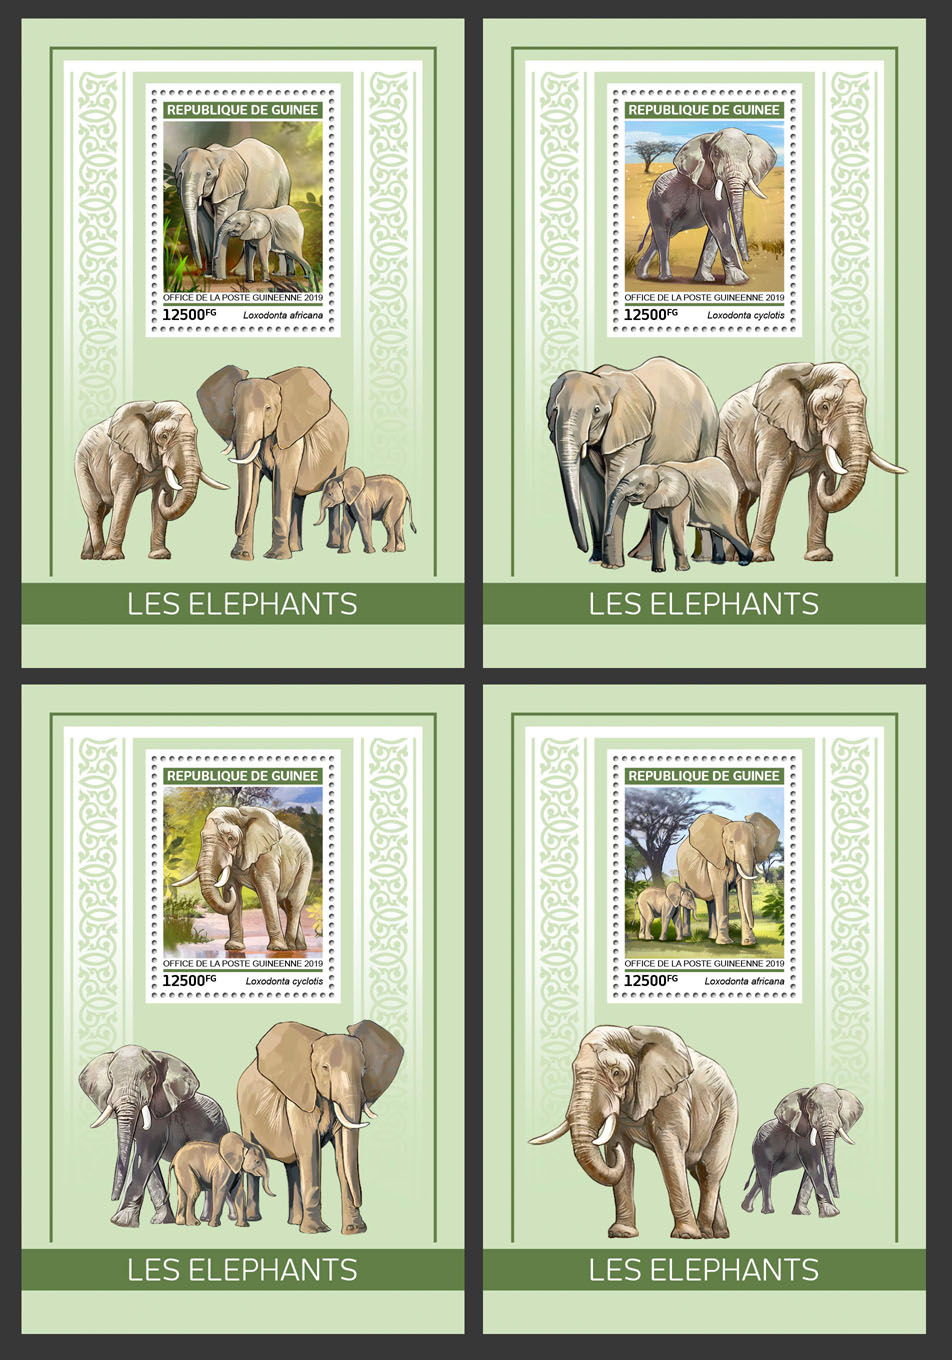 Elephants - Issue of Guinée postage stamps